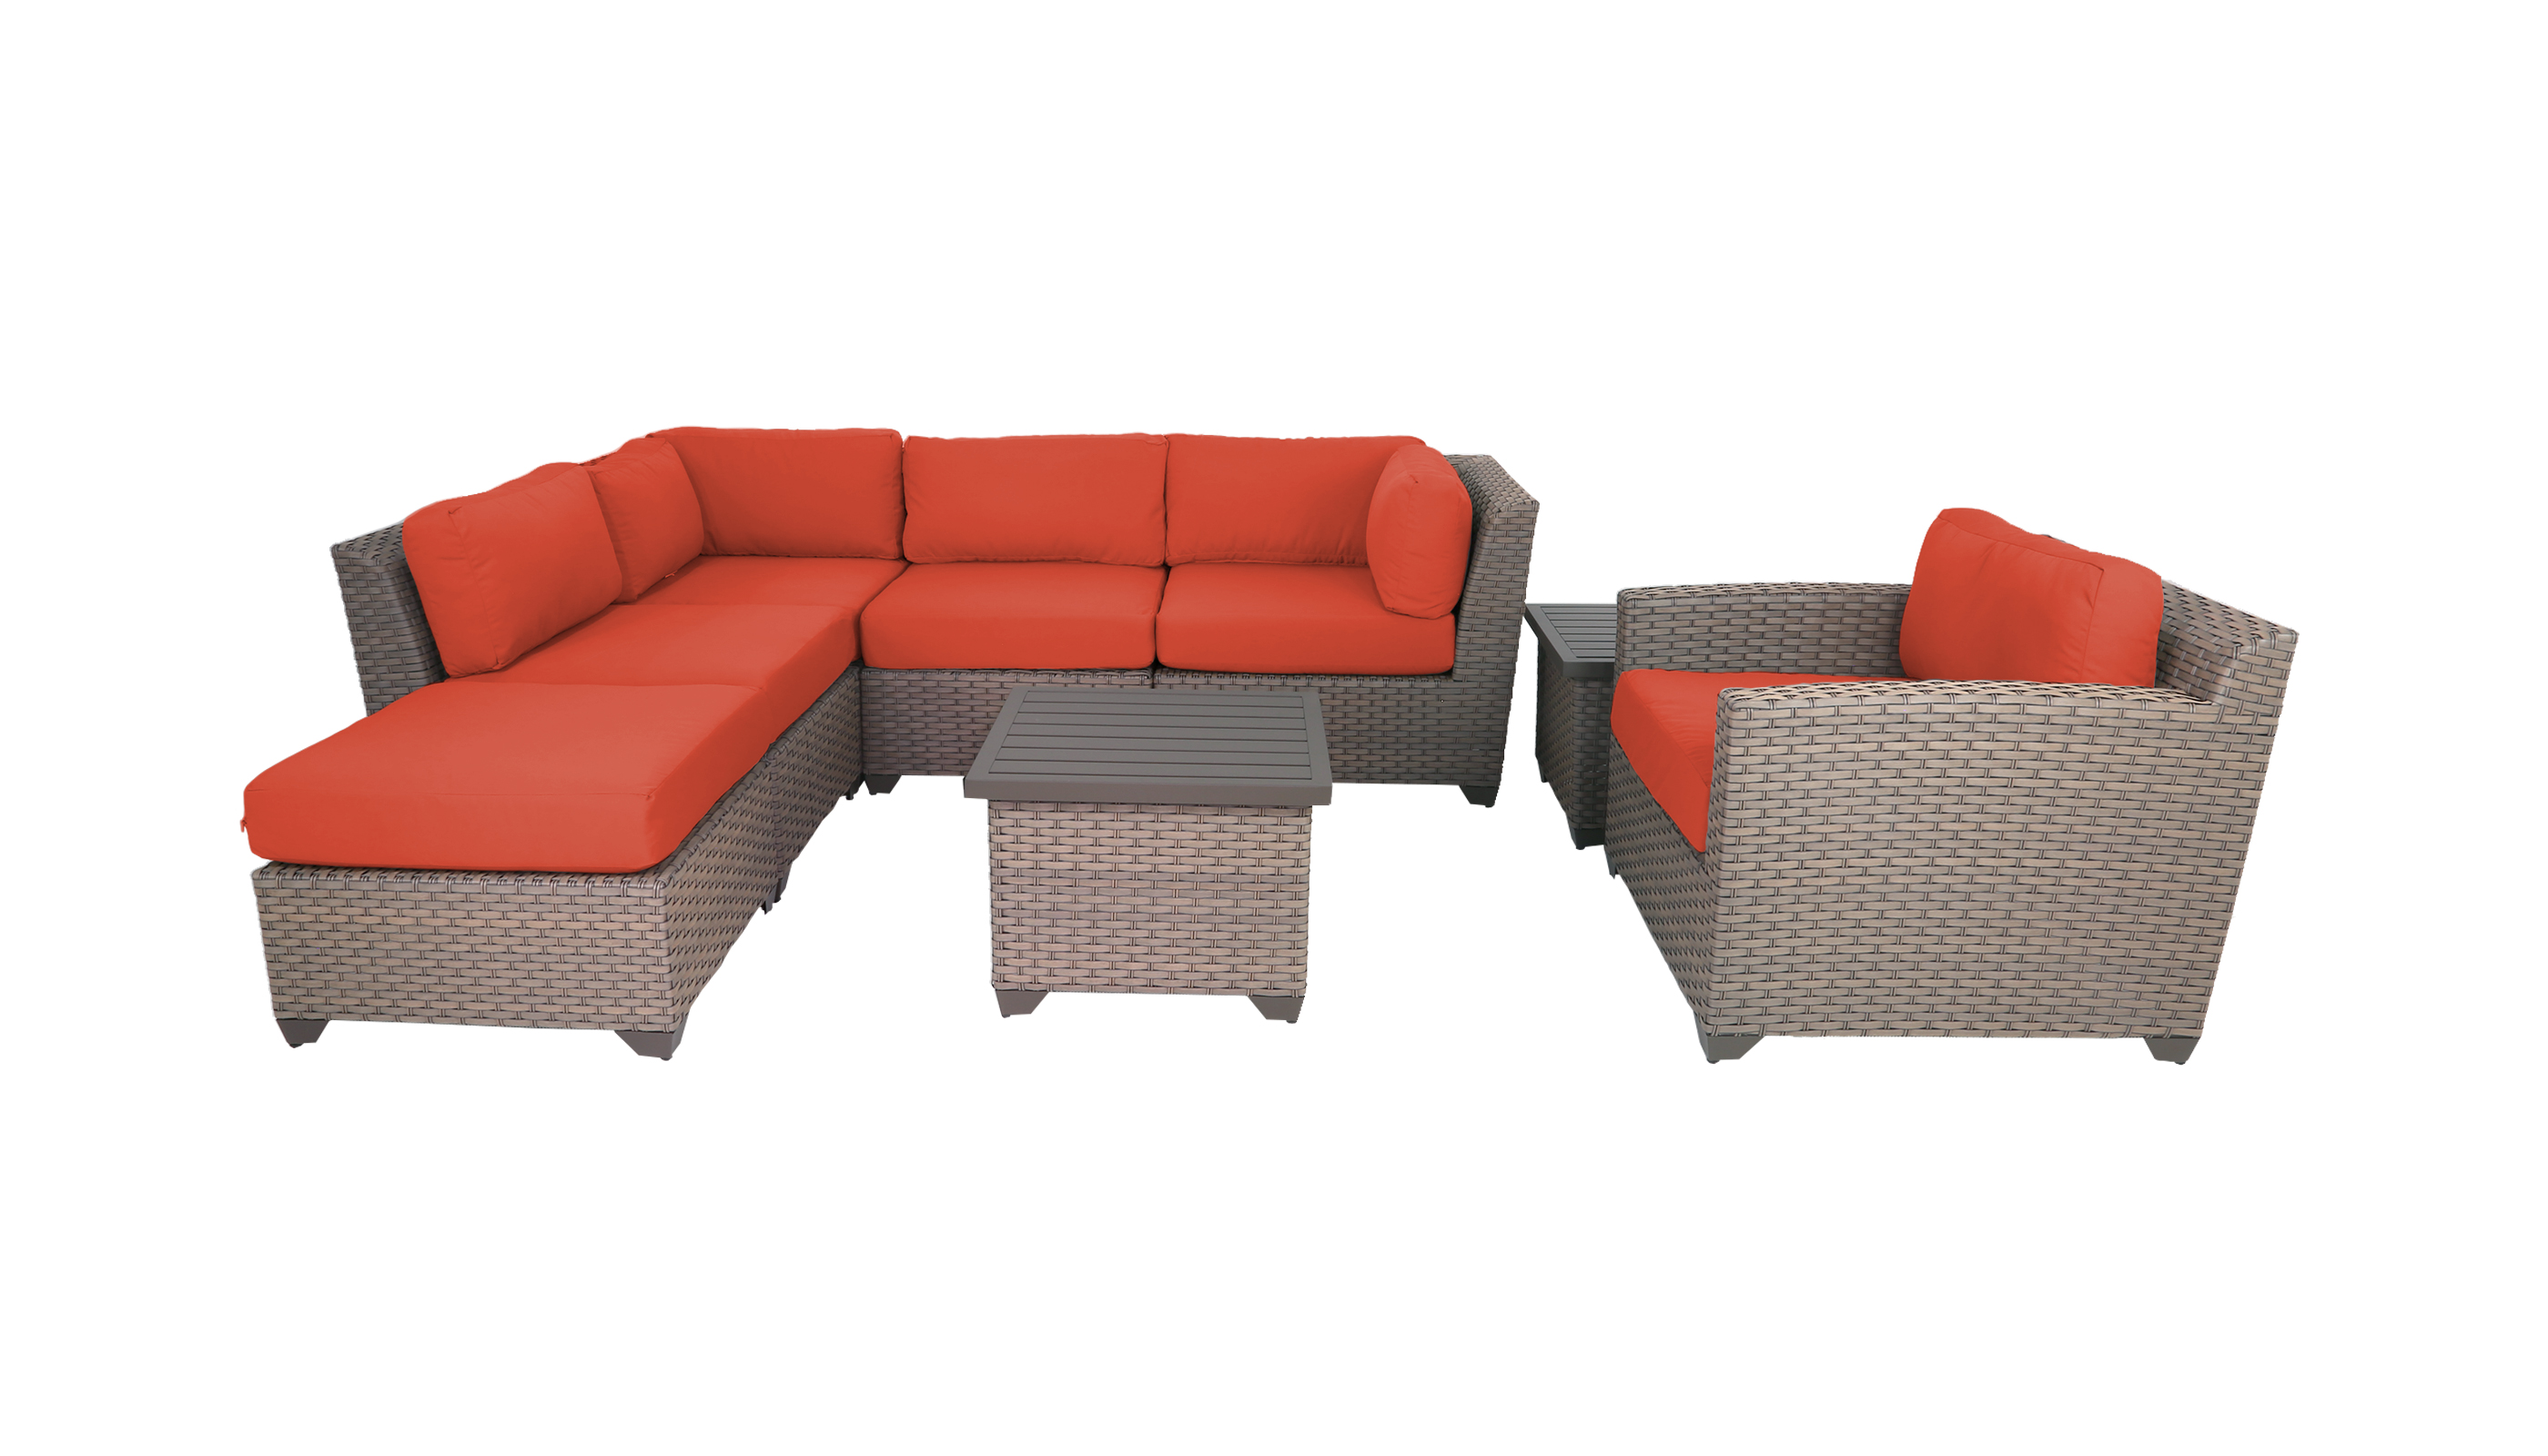 TK Classics Florence Wicker 8 Piece Patio Conversation Set with End Table and 2 Sets of Cushion Covers - image 2 of 12